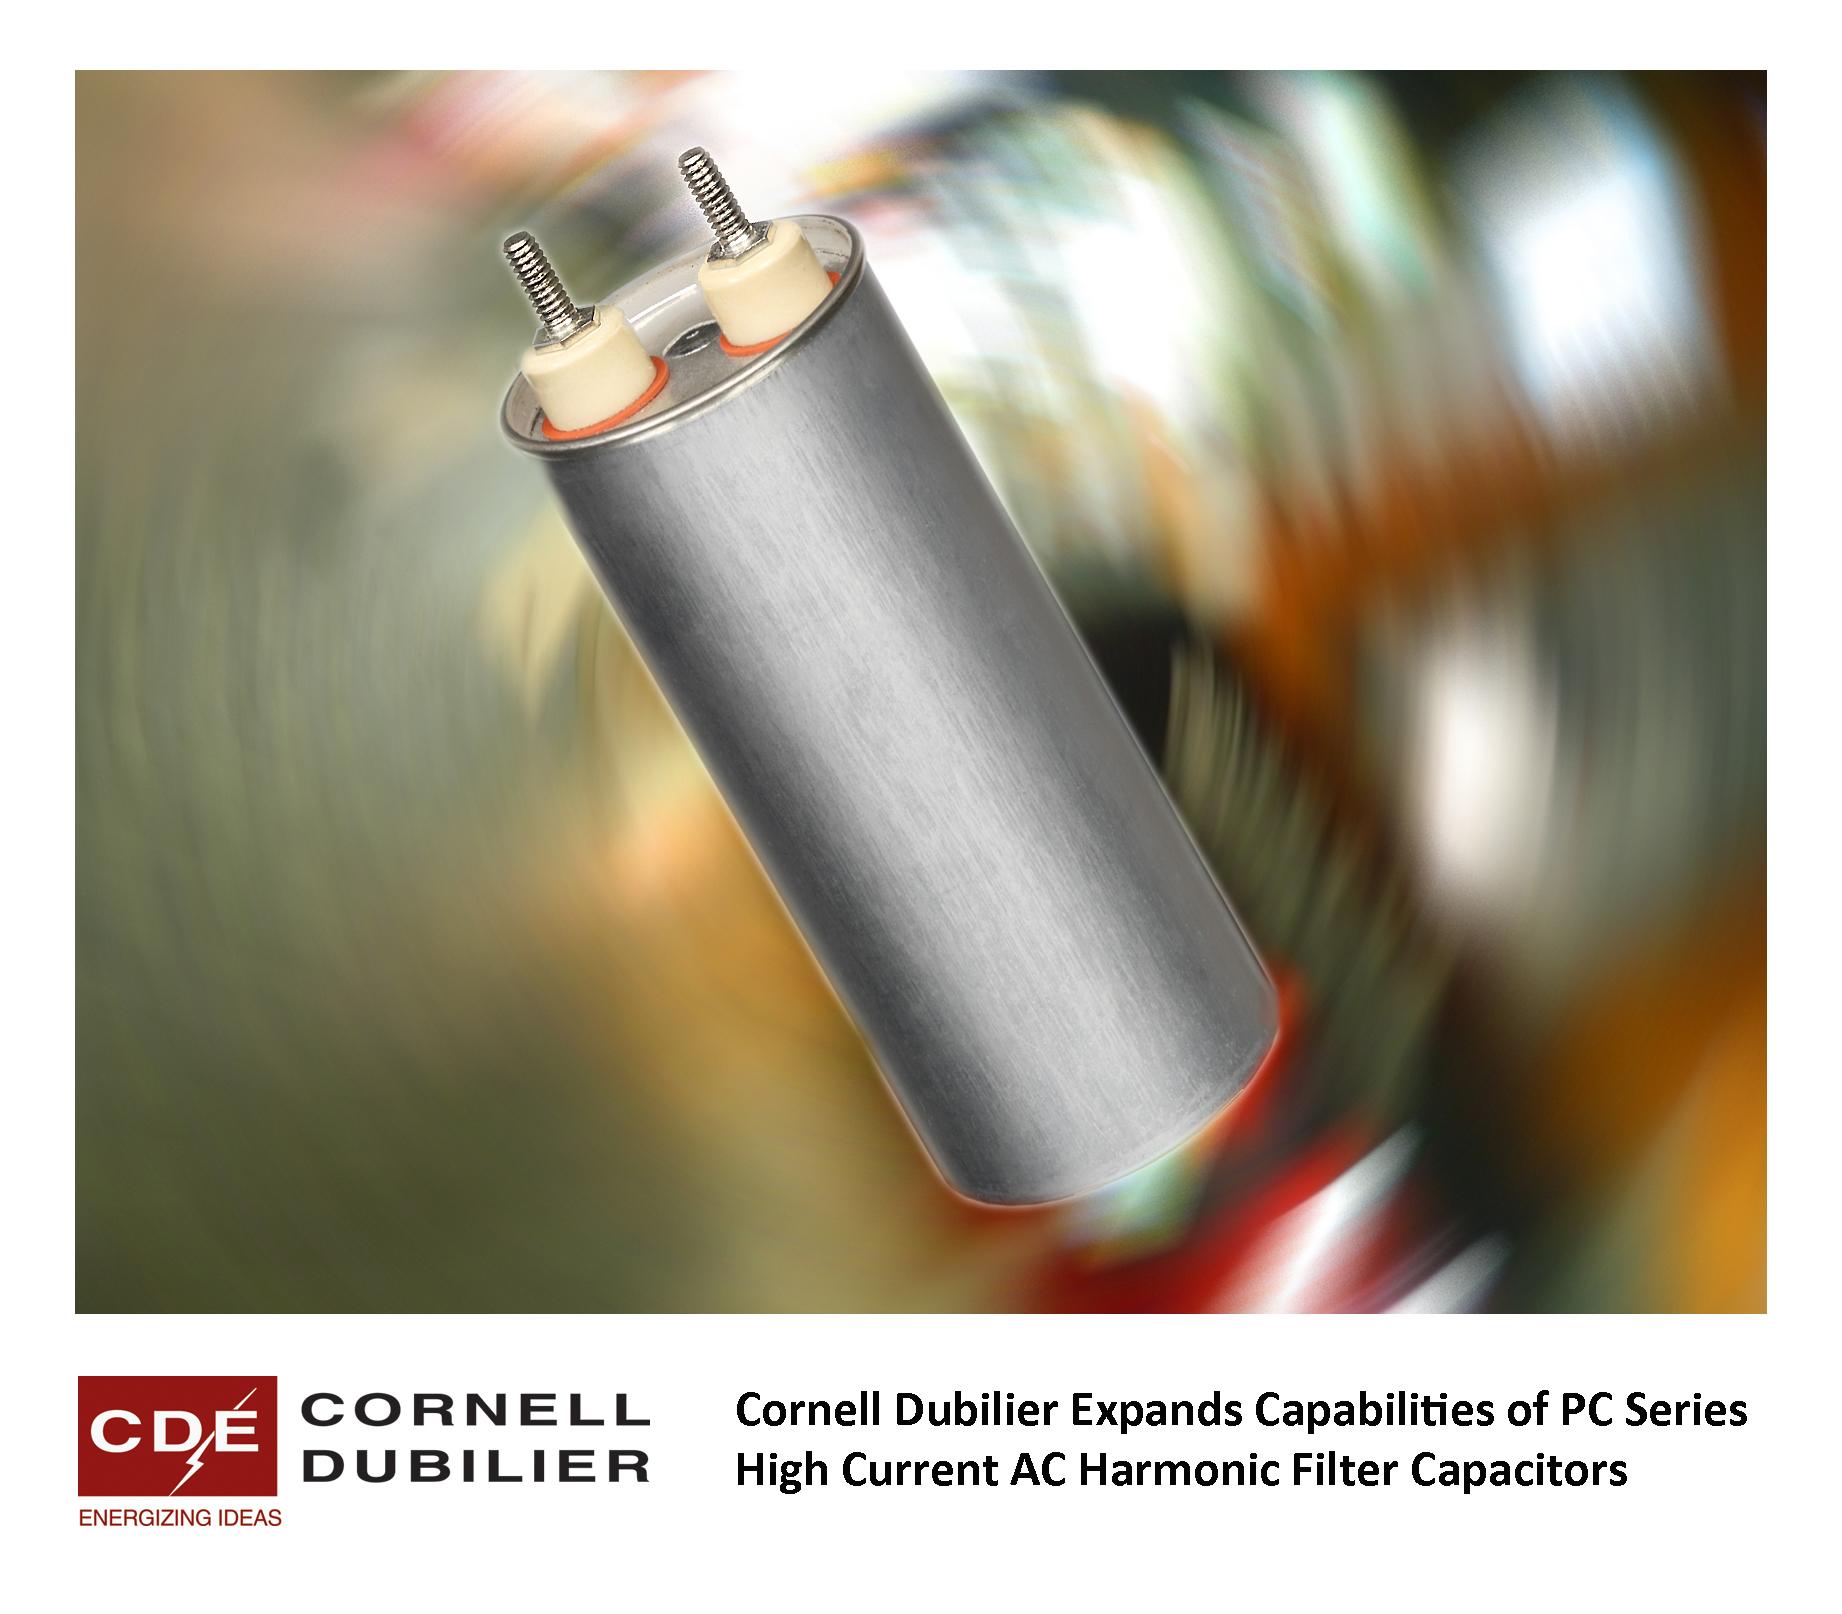 AC Harmonic Filter Capacitors Offer 85 Ampere RMS Ratings